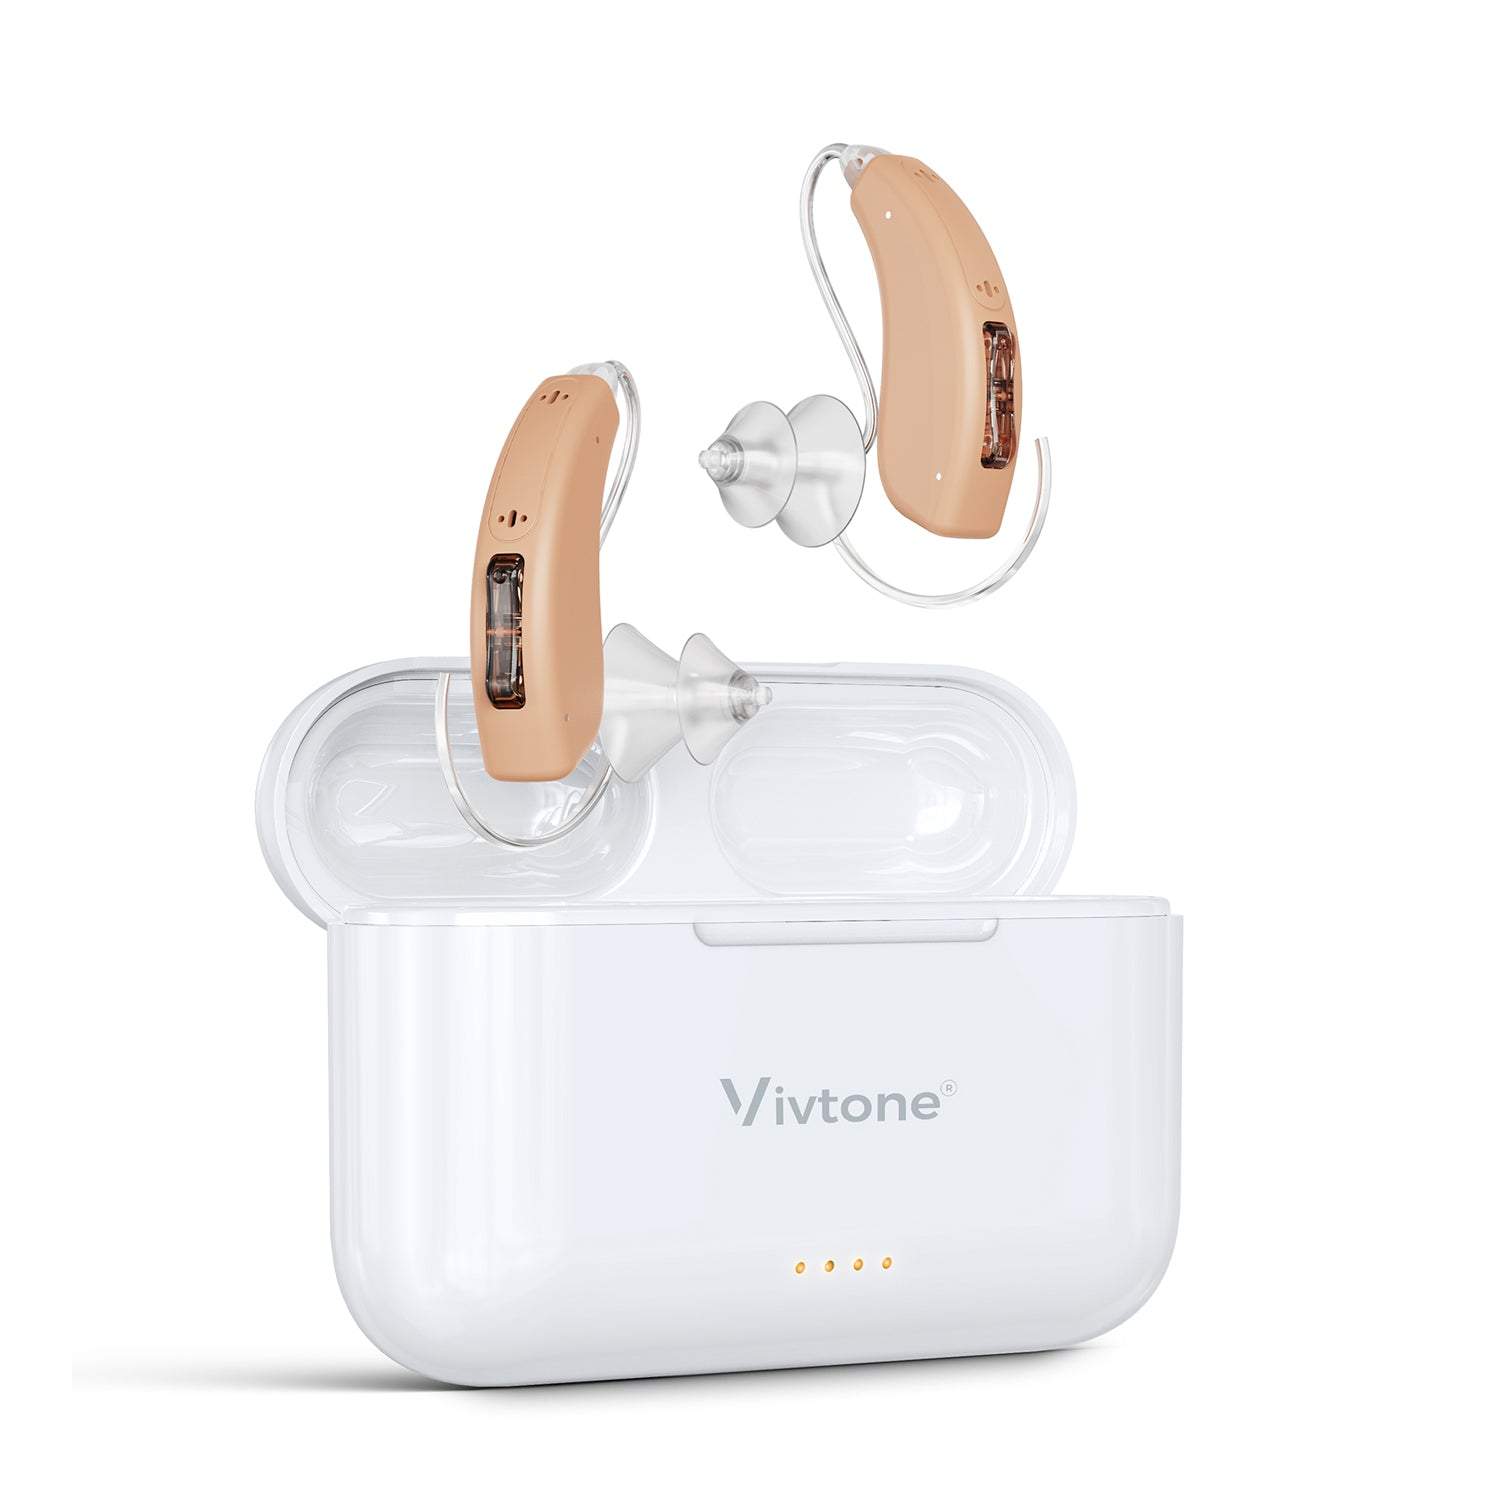 Vivtone Leads with Affordable Bluetooth Hearing Aids